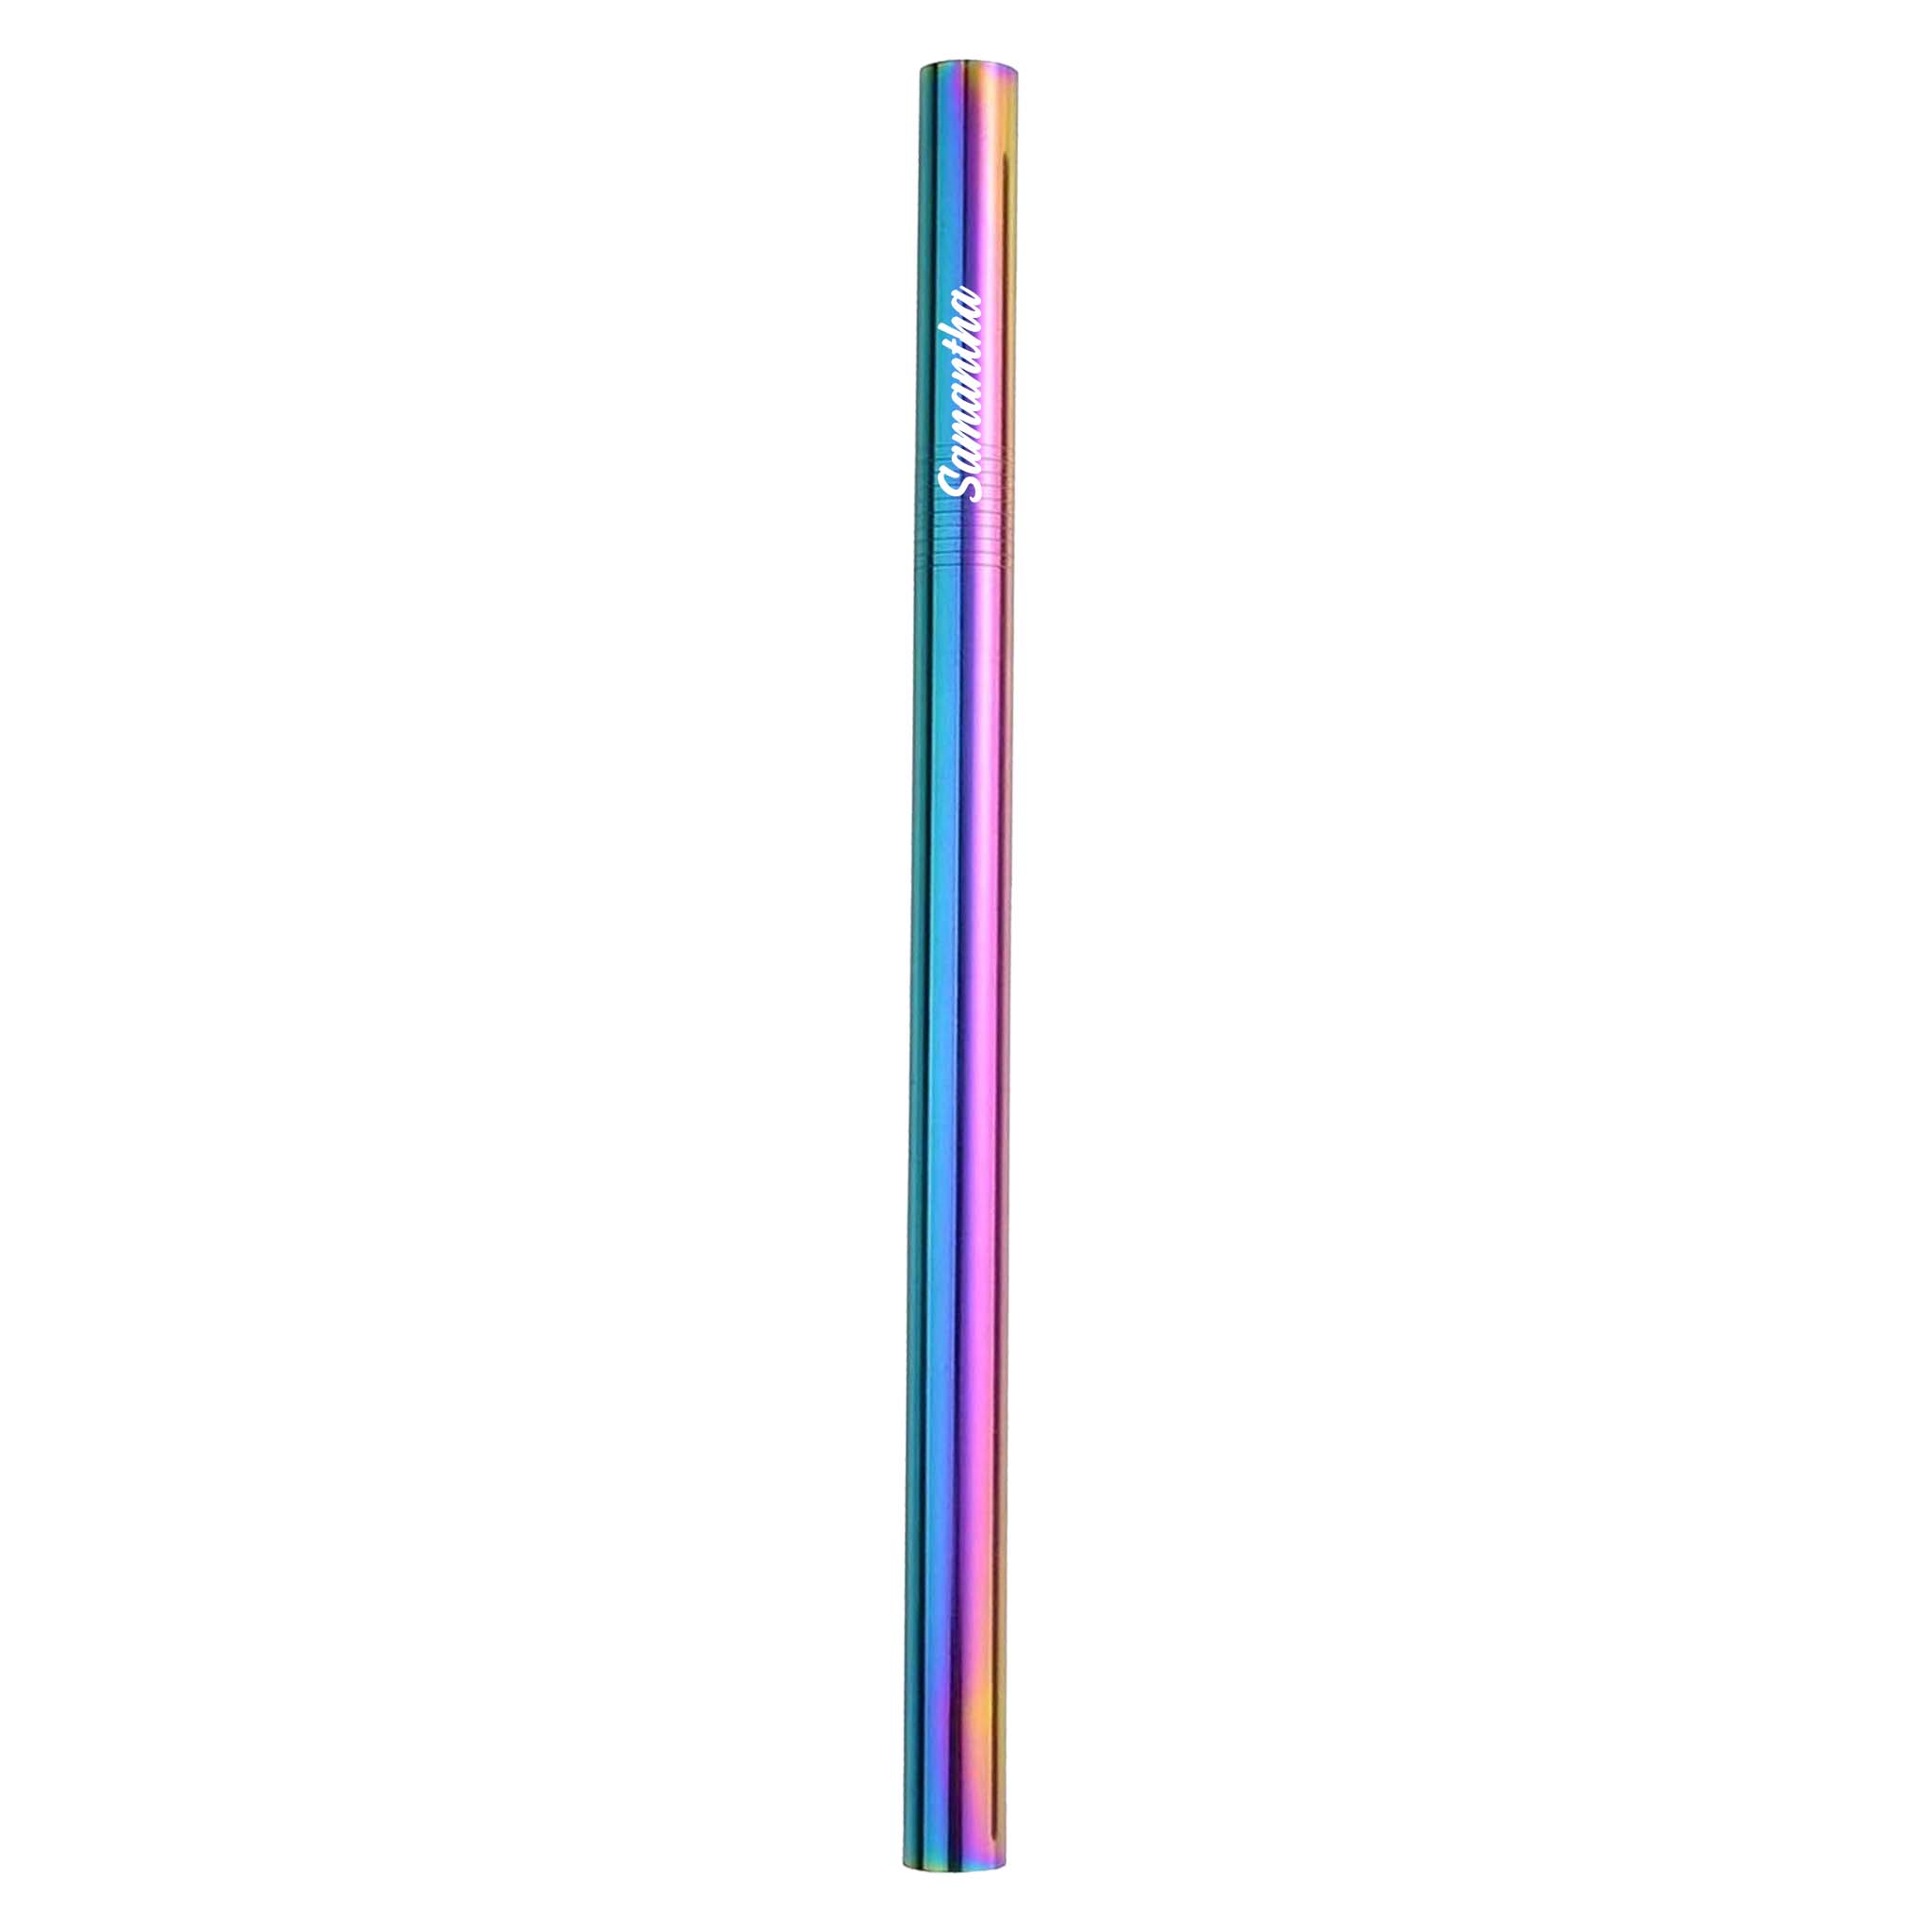 Reusable Stainless Steel Smoothie Straw (Rainbow)